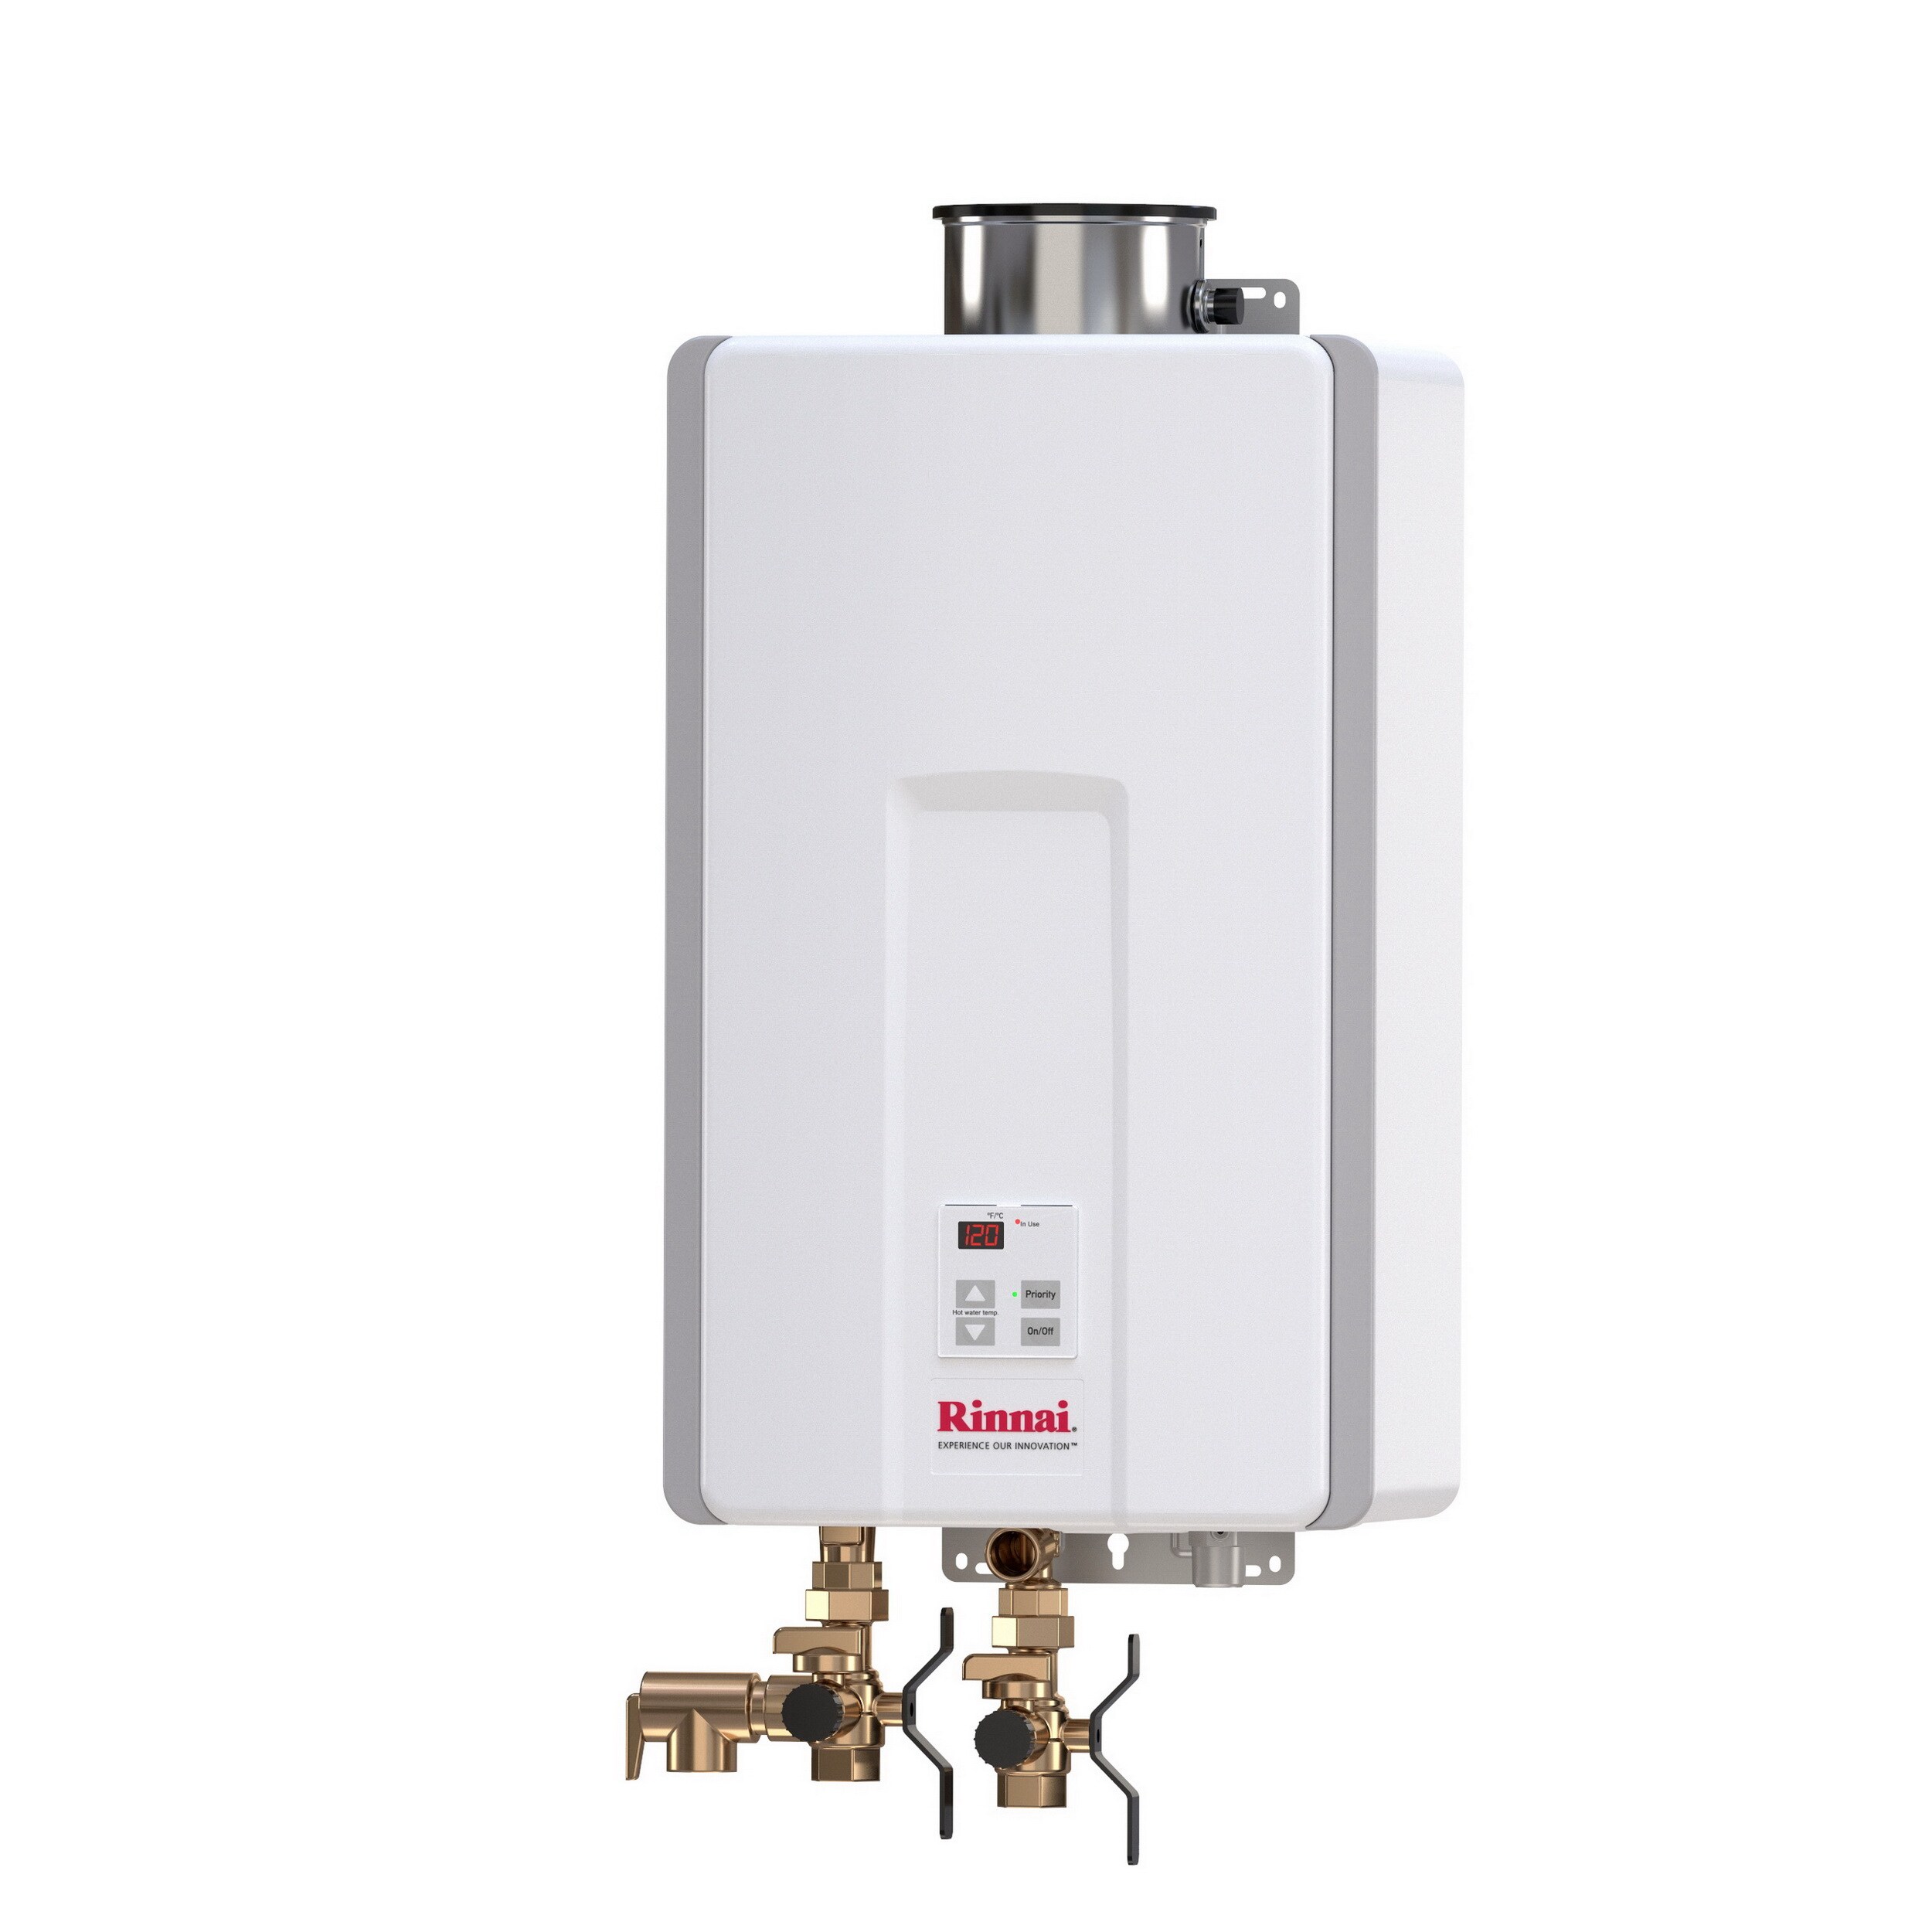 Rinnai Water Heaters at Lowes.com